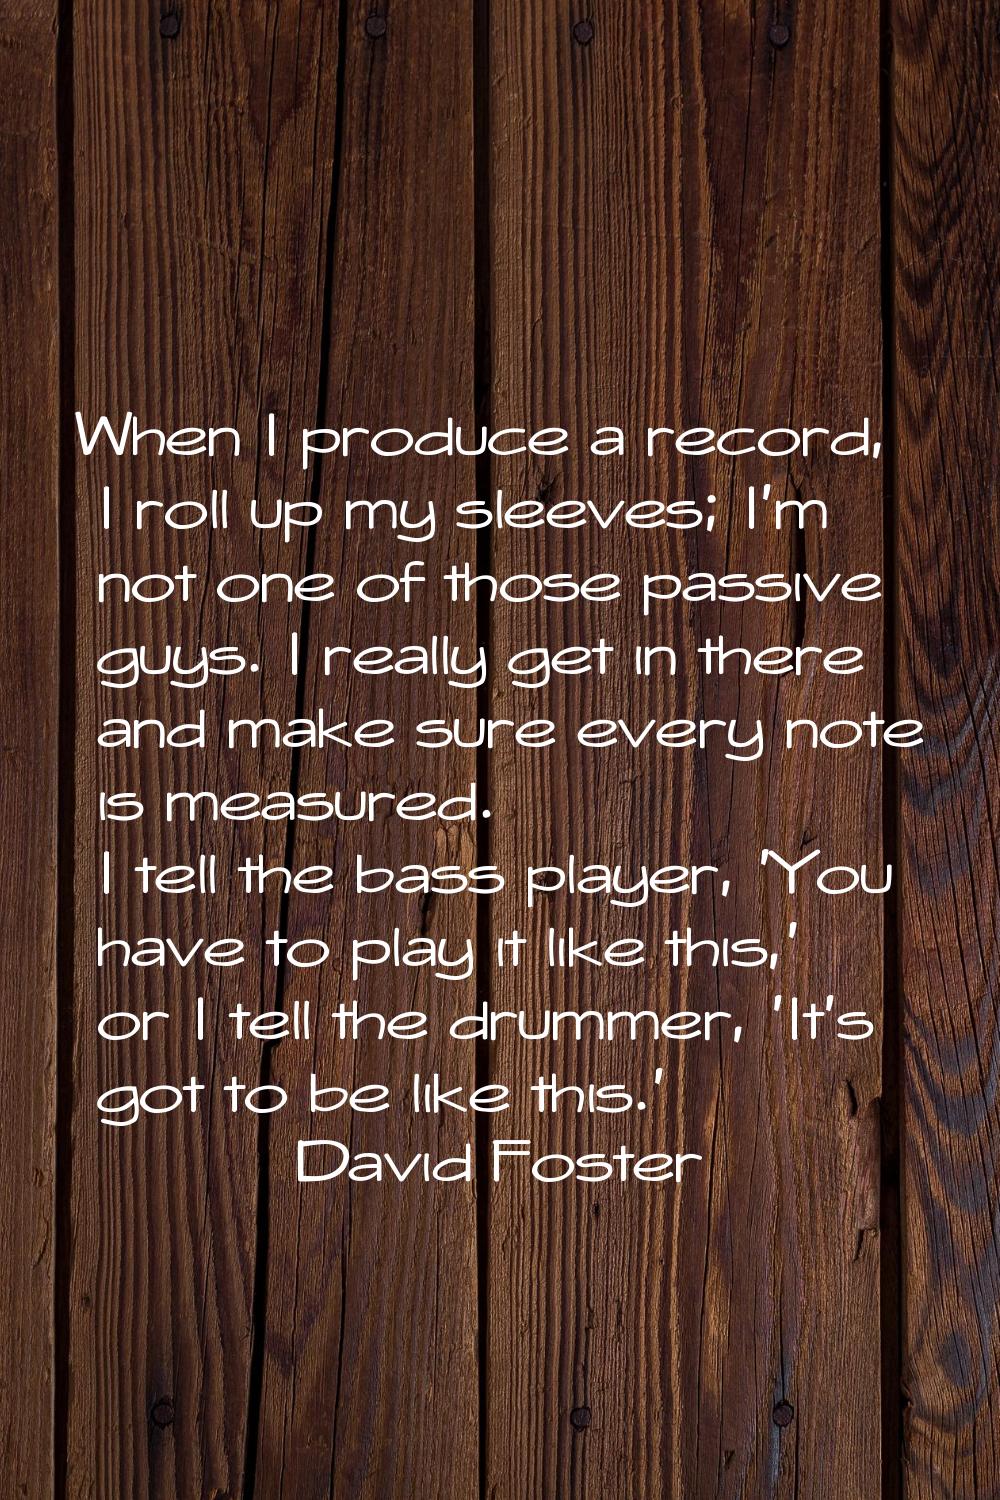 When I produce a record, I roll up my sleeves; I'm not one of those passive guys. I really get in t